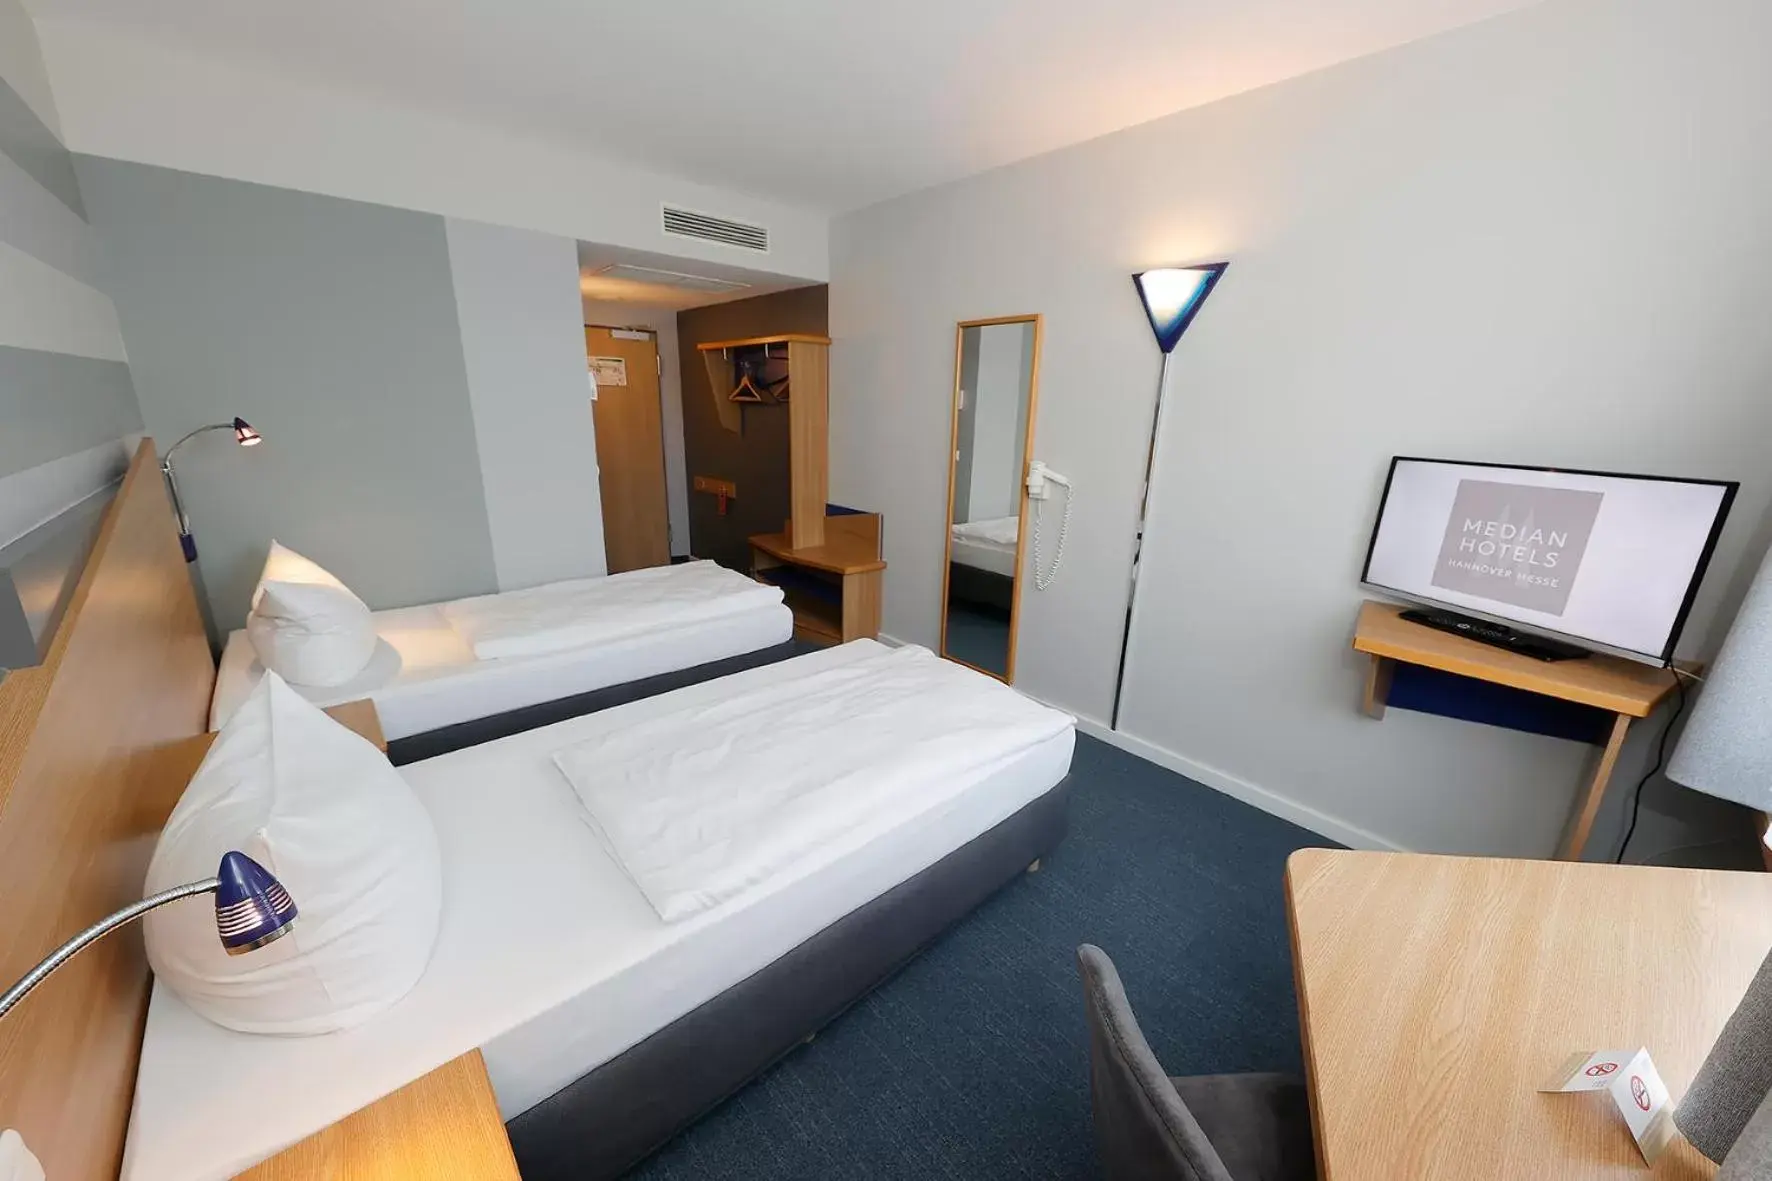 TV and multimedia, Bed in Median Hotel Hannover Messe